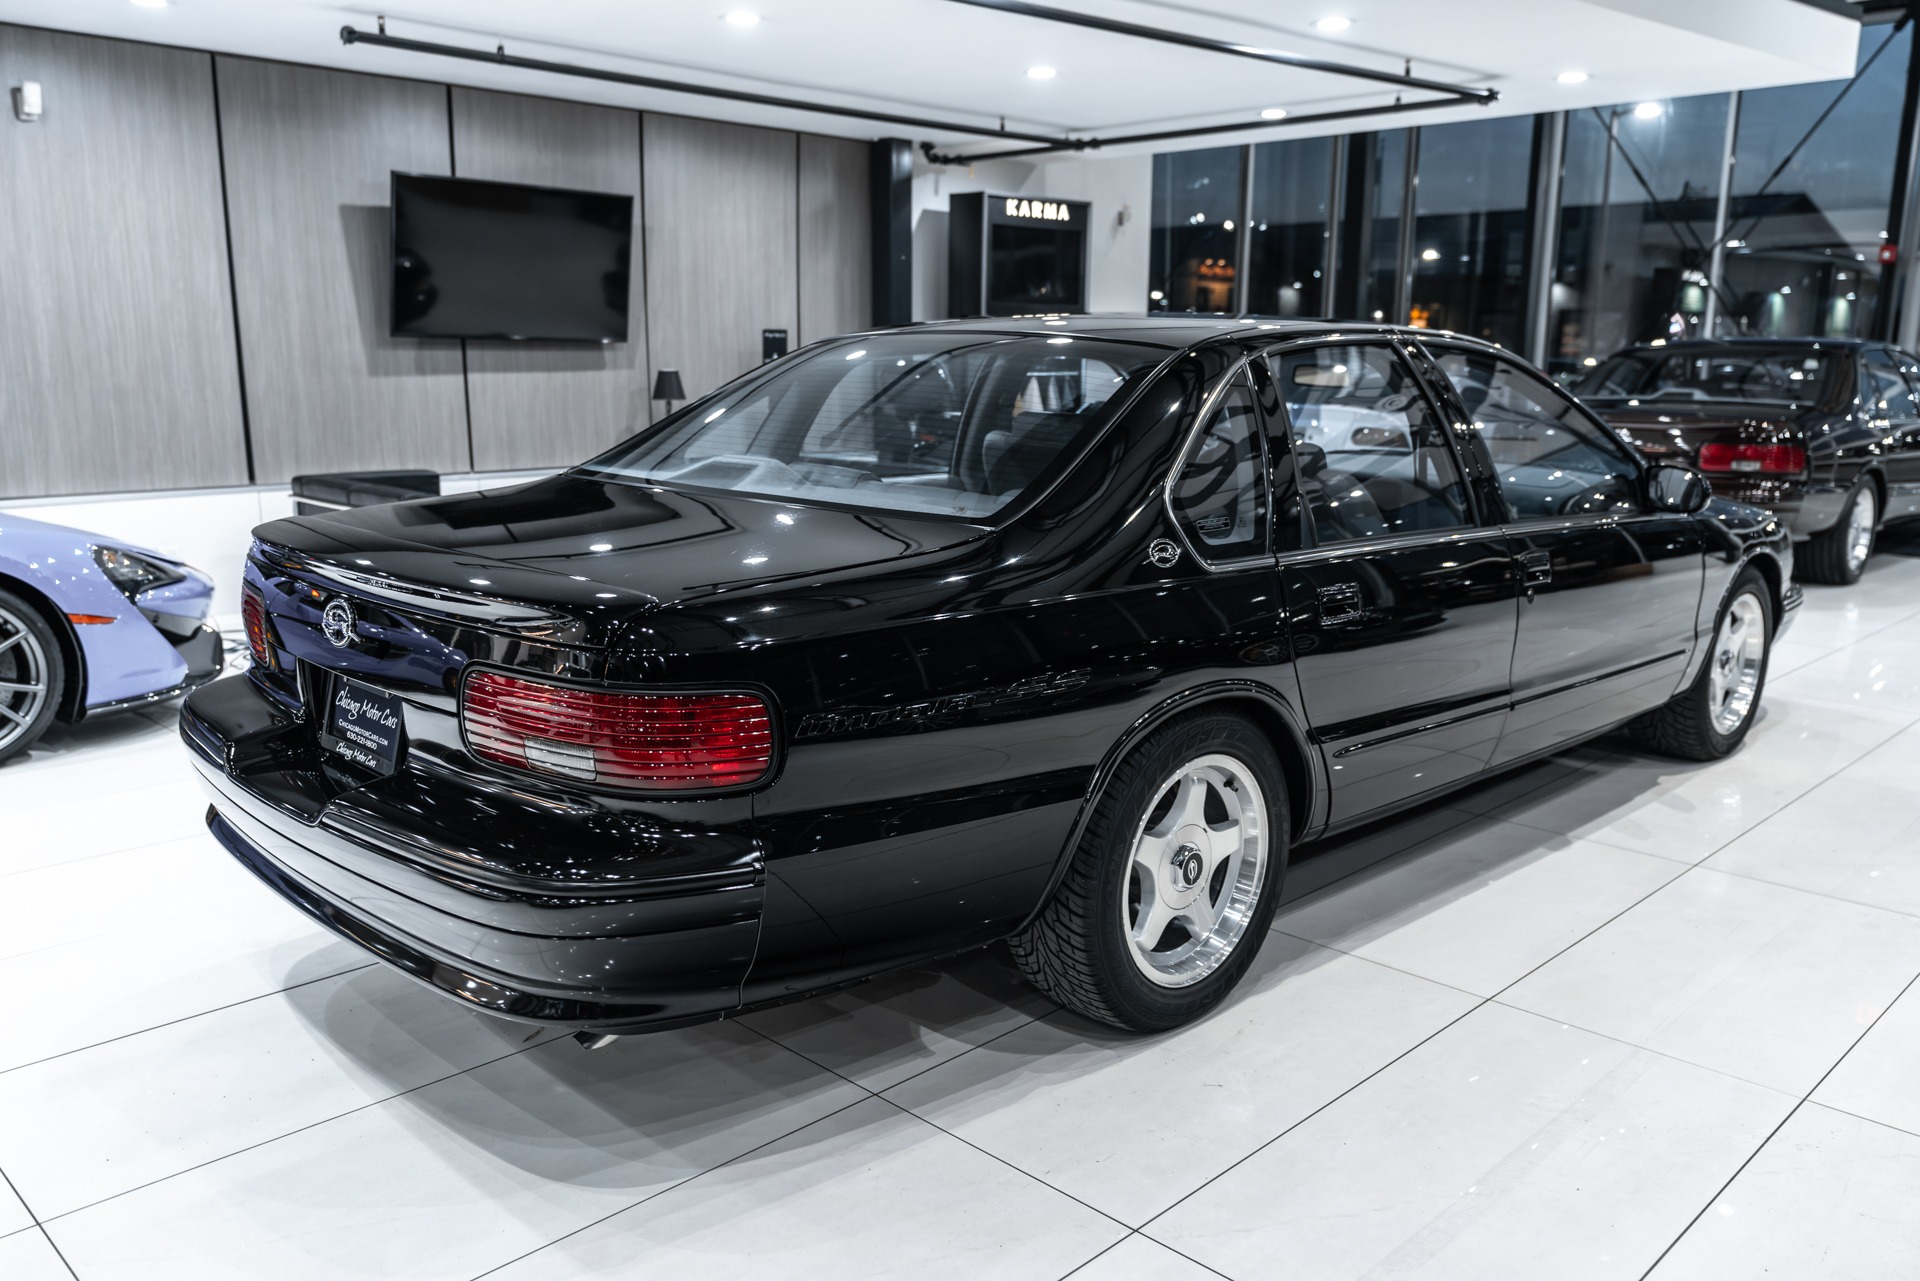 Used-1996-Chevrolet-Impala-SS-Only-6k-Miles-Collector-Condition-Stunning-Black-Paint